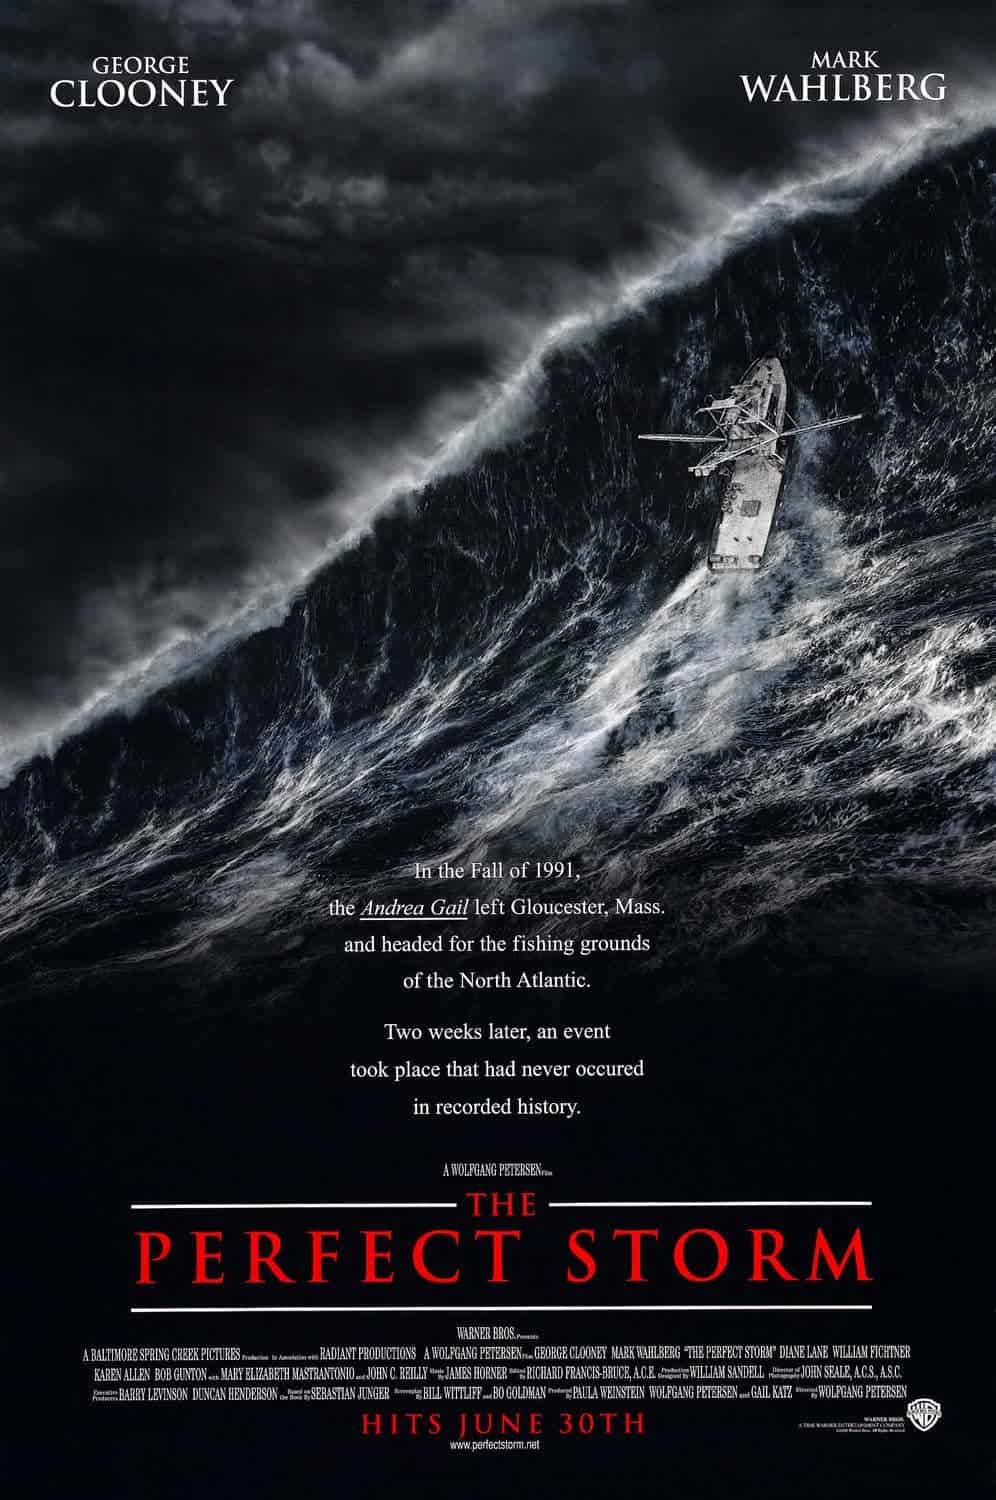 The Perfect Storm (2000) 15 Best Nature Movies to Add in Your Watchlist